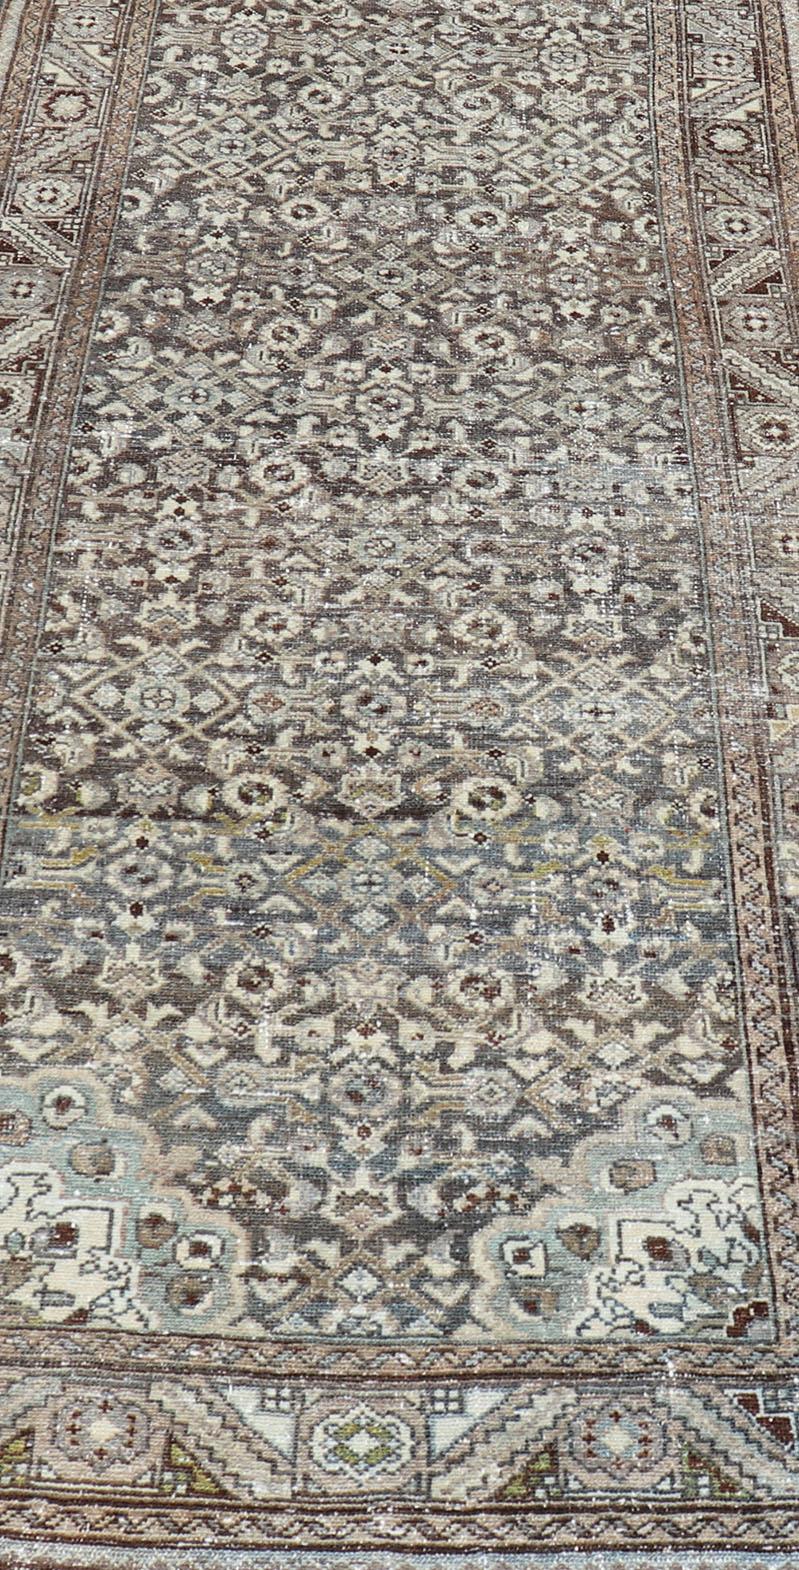 This antique Persian  Malayer runner is rendered in shades of brown, blue, cream and gray. The field and the border both hold an all-over design. 
Measures; 3'6 x 13'5
Country of Origin: Iran Type: Malayer  Design: Herati, All-Over, 